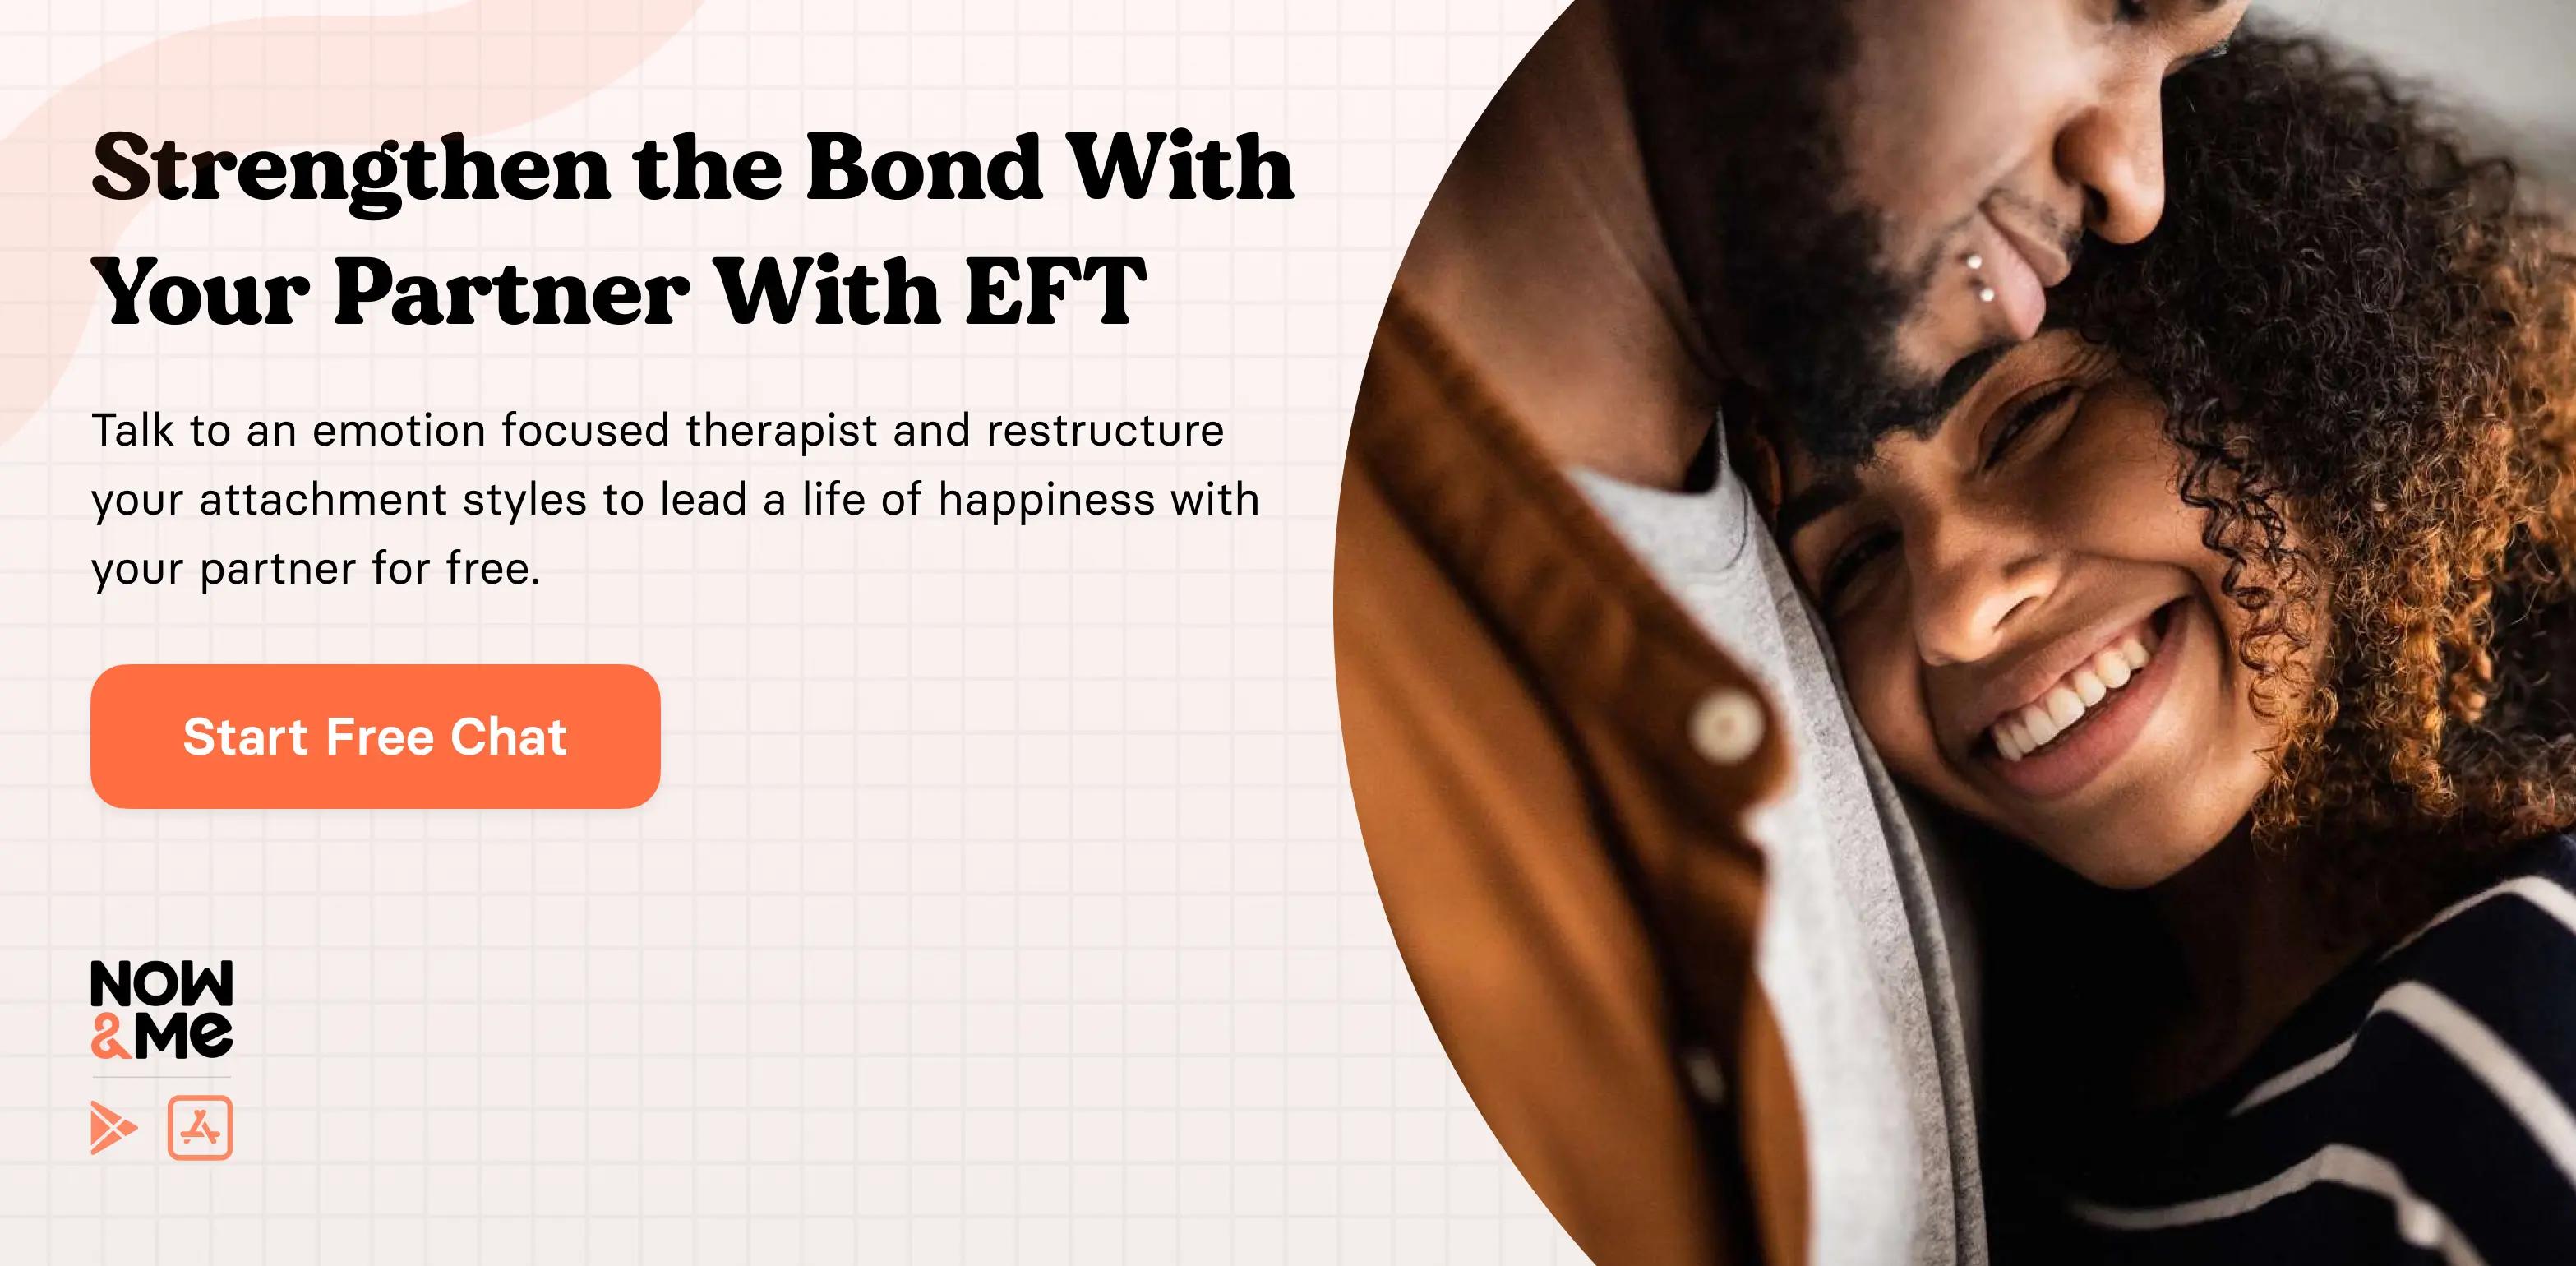 Strengthen the Bond With Your Partner With EFT